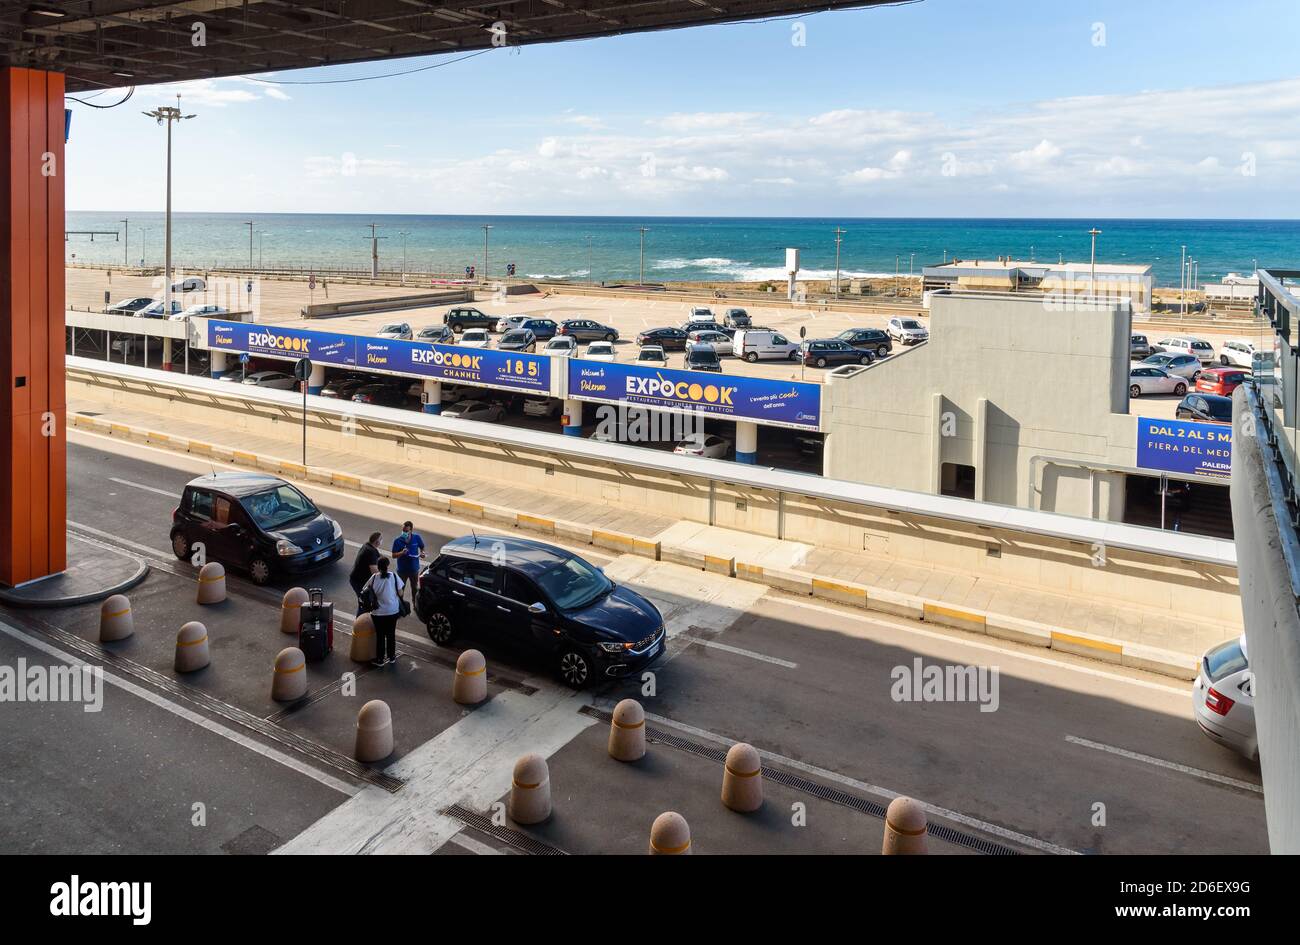 Palermo, Punta Raisi, Italy - September 29, 2020: Exterior of Palermo Falcone Borsellino Airport Departures terminal, with view of the parking and med Stock Photo